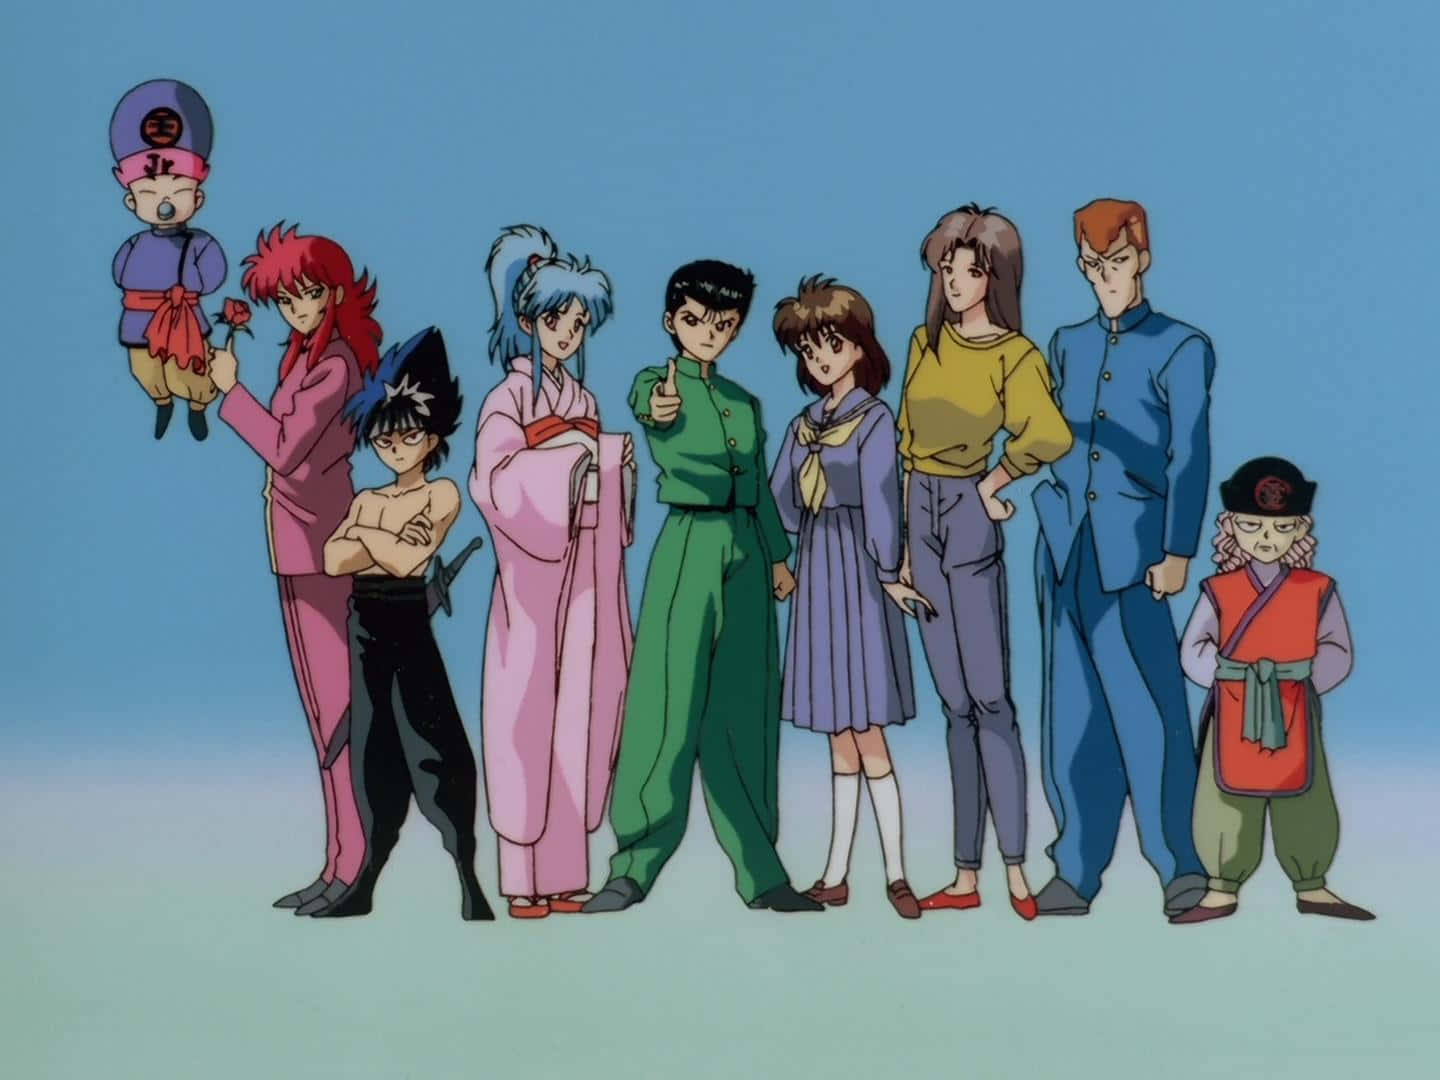 a group of anime characters standing together